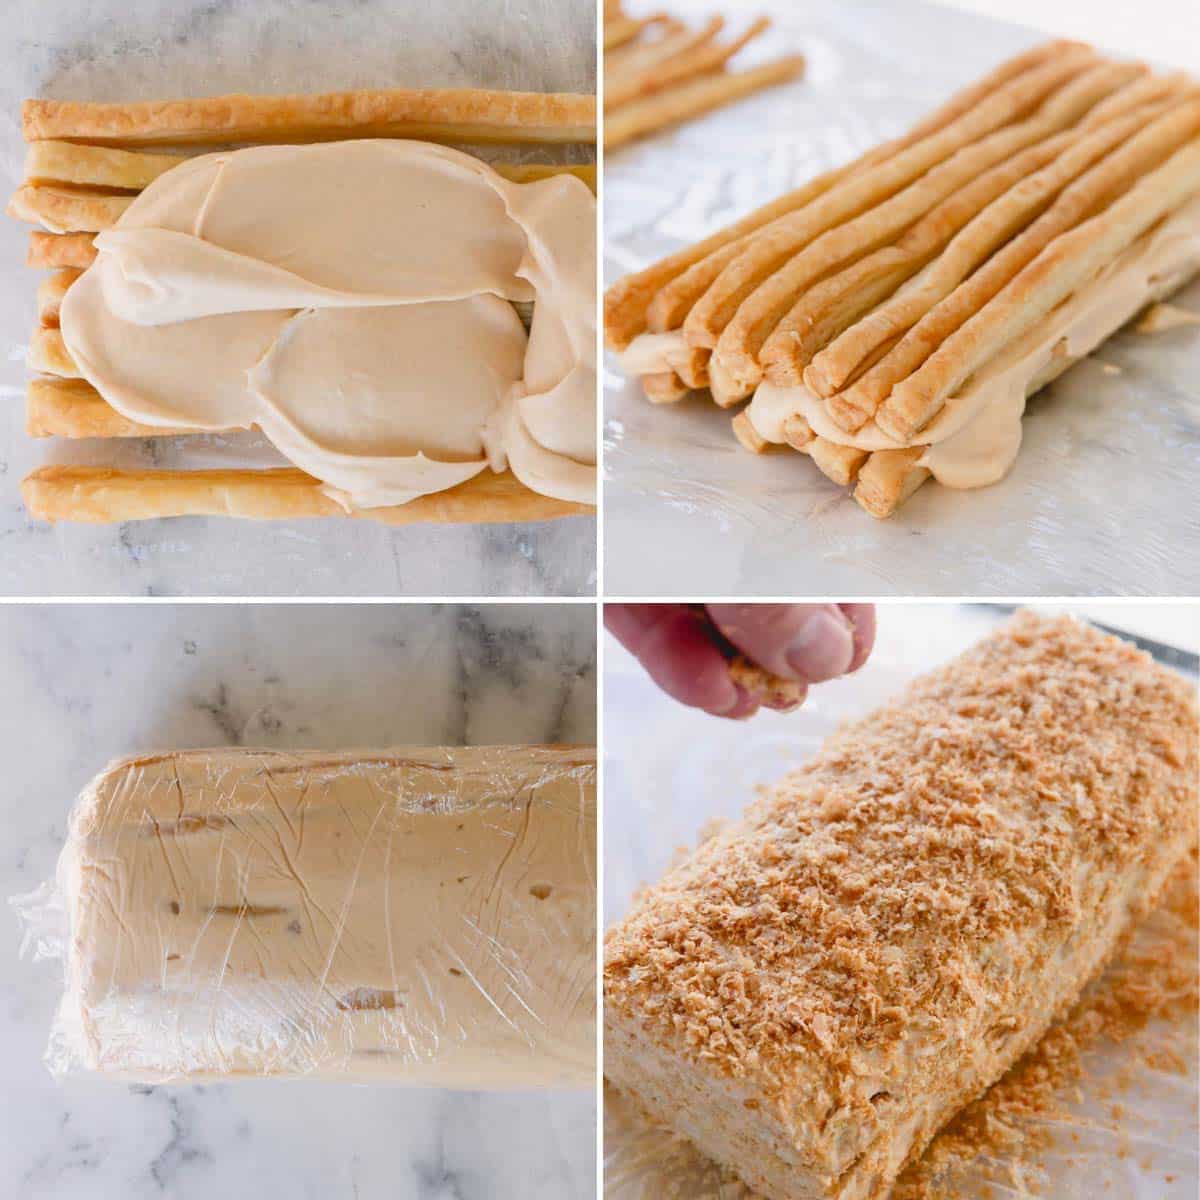 4 step by step images of assembling the puff pastry cake.